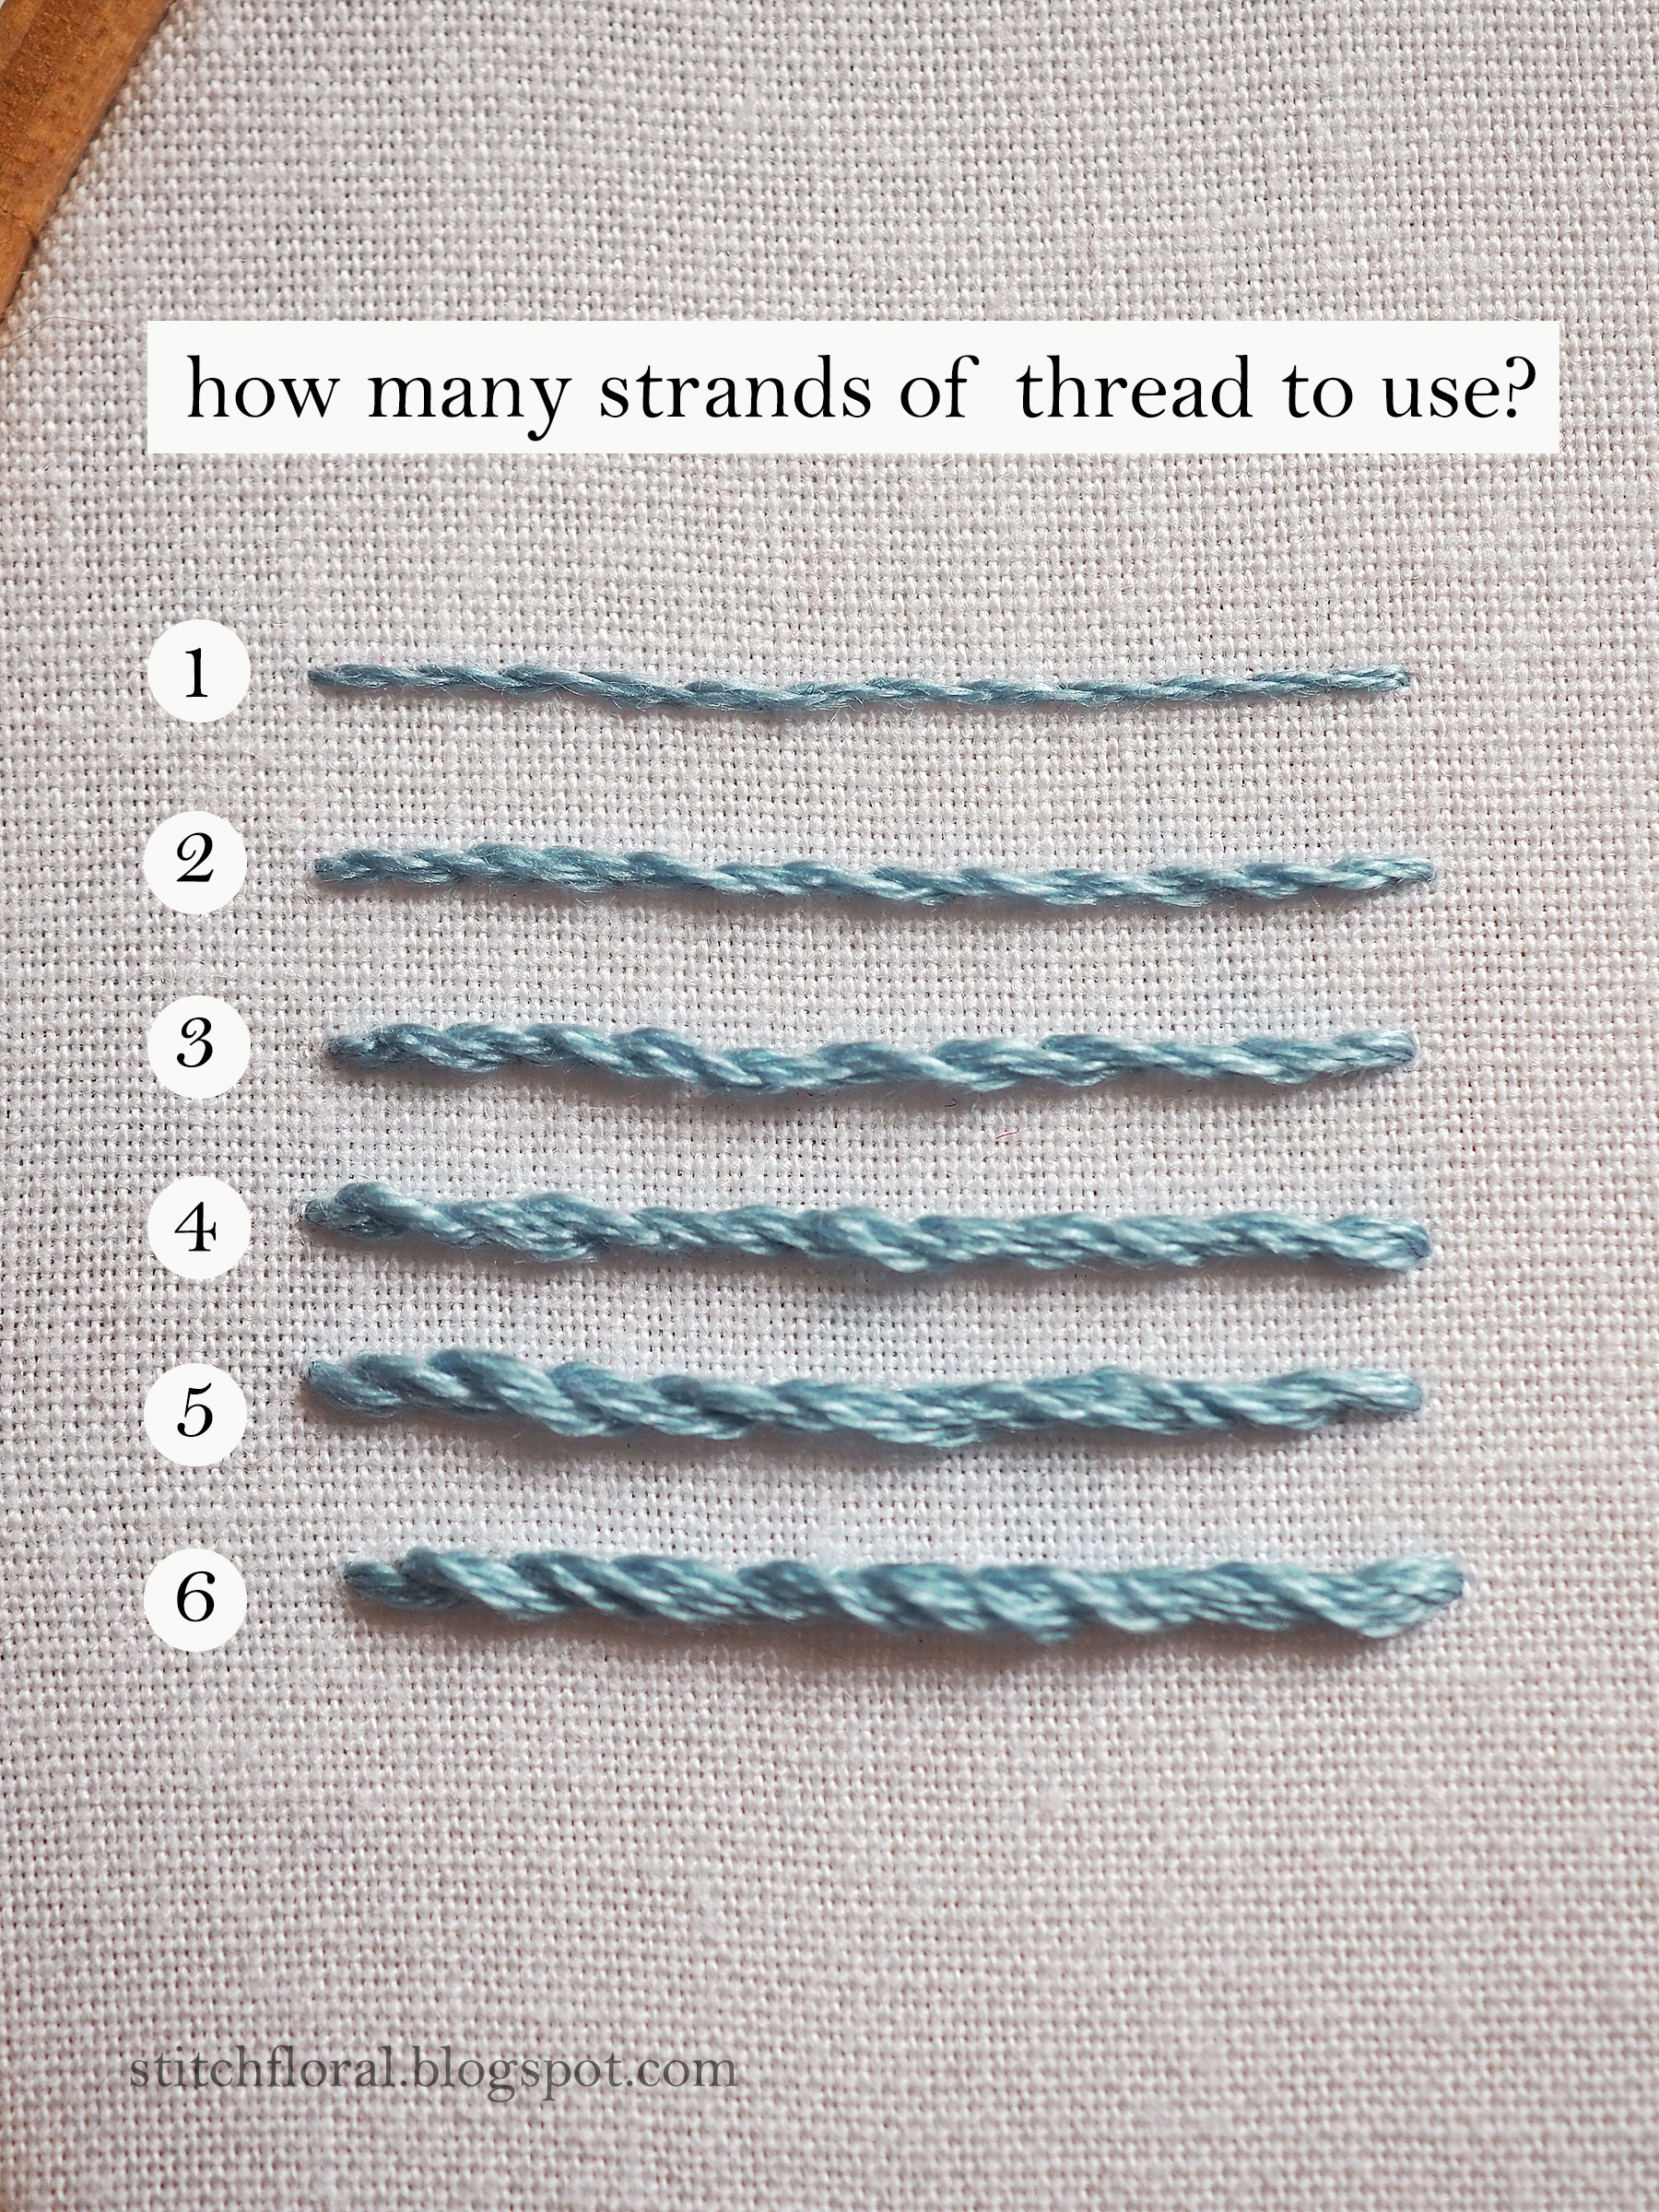 how-many-strands-of-thread-to-use-in-embroidery-stitch-floral